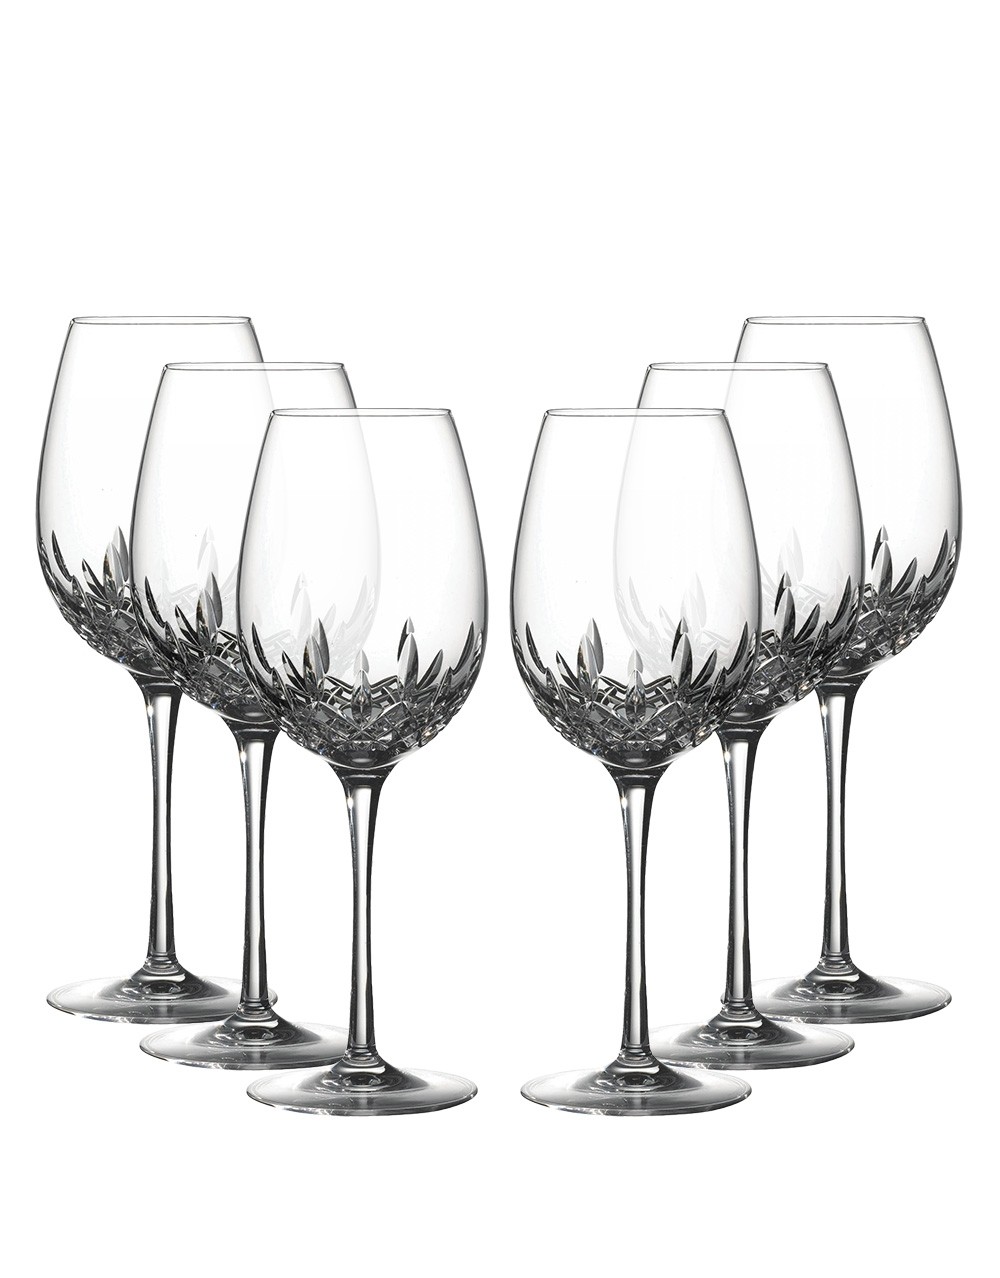 Waterford Lismore Essence Goblet Set | Buy Online or Send as a Gift